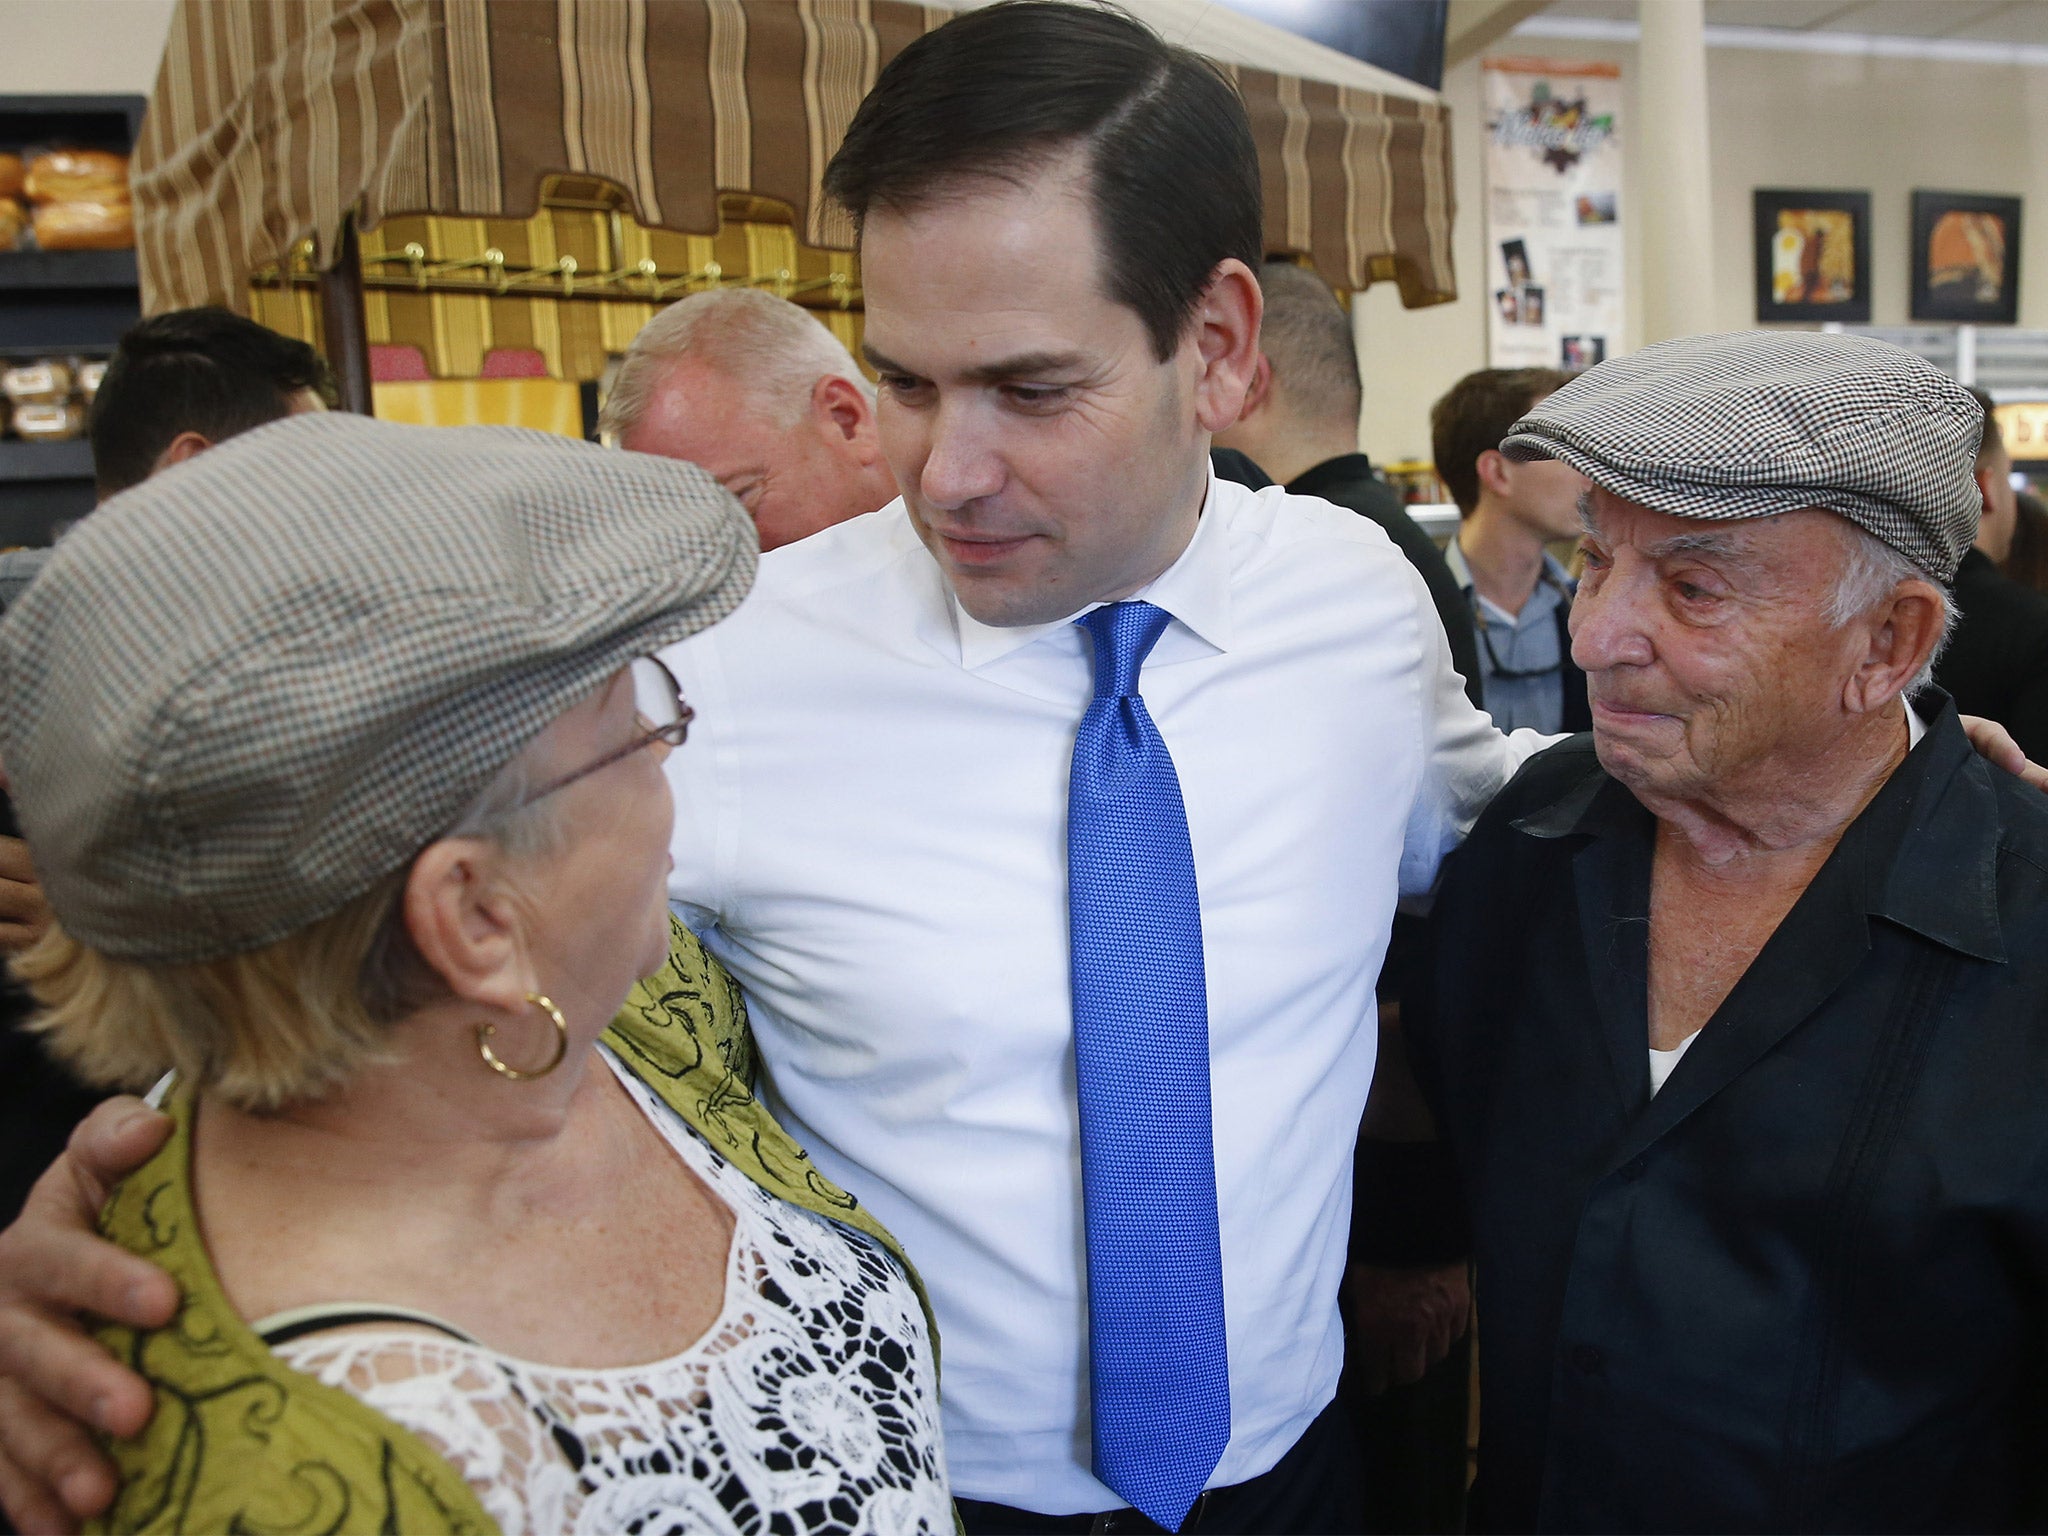 &#13;
Senator Marco Rubio speaks with patrons at the Melao Bakery in Kissimmee, Florida (AP)&#13;